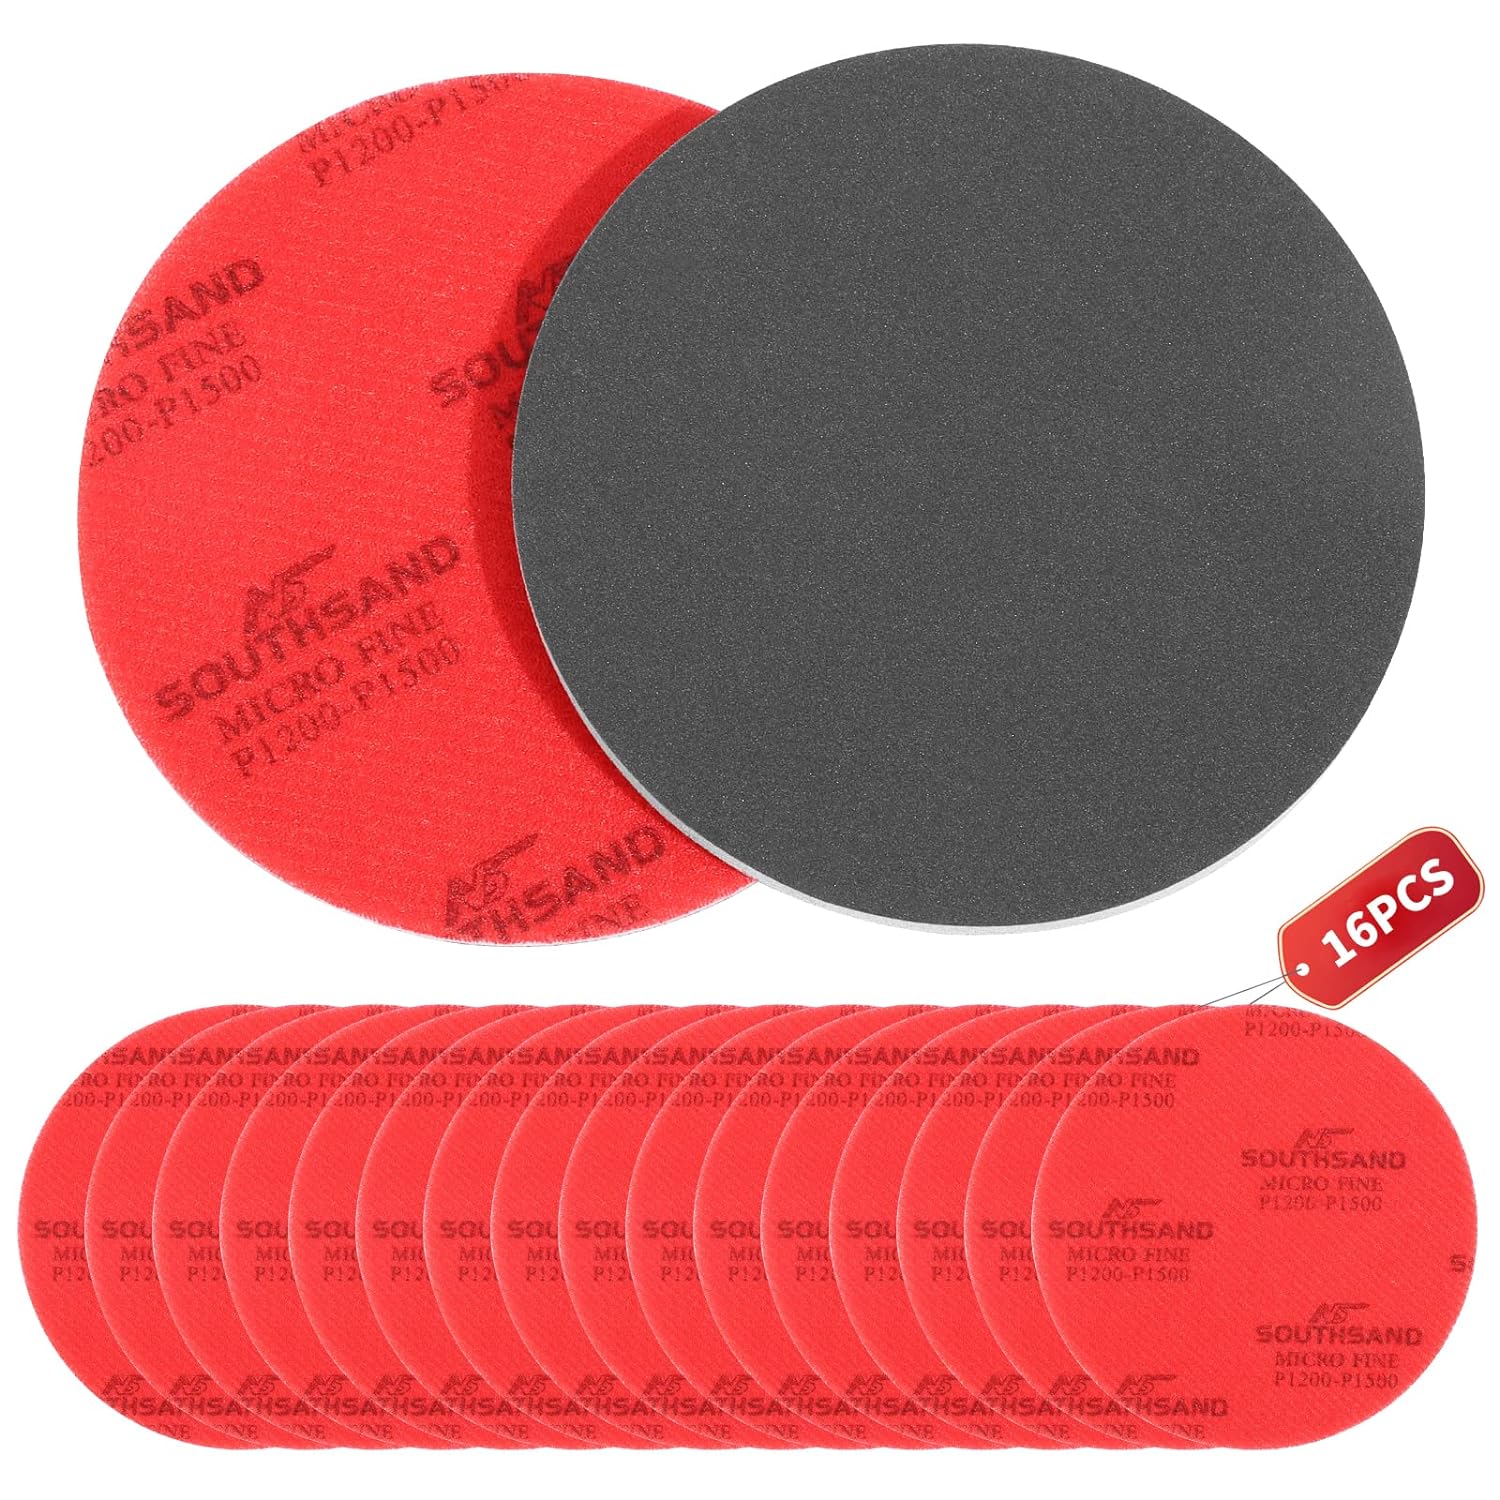 16 Pack Bowling Sanding Pads Bowling Accessories Bowling Ball Sanding Sand Pads Resurfacing Polishing Cleaning Kit, Grit 500, 800, 1000, 1200, 1500, 2000, 2500, 3000，4000